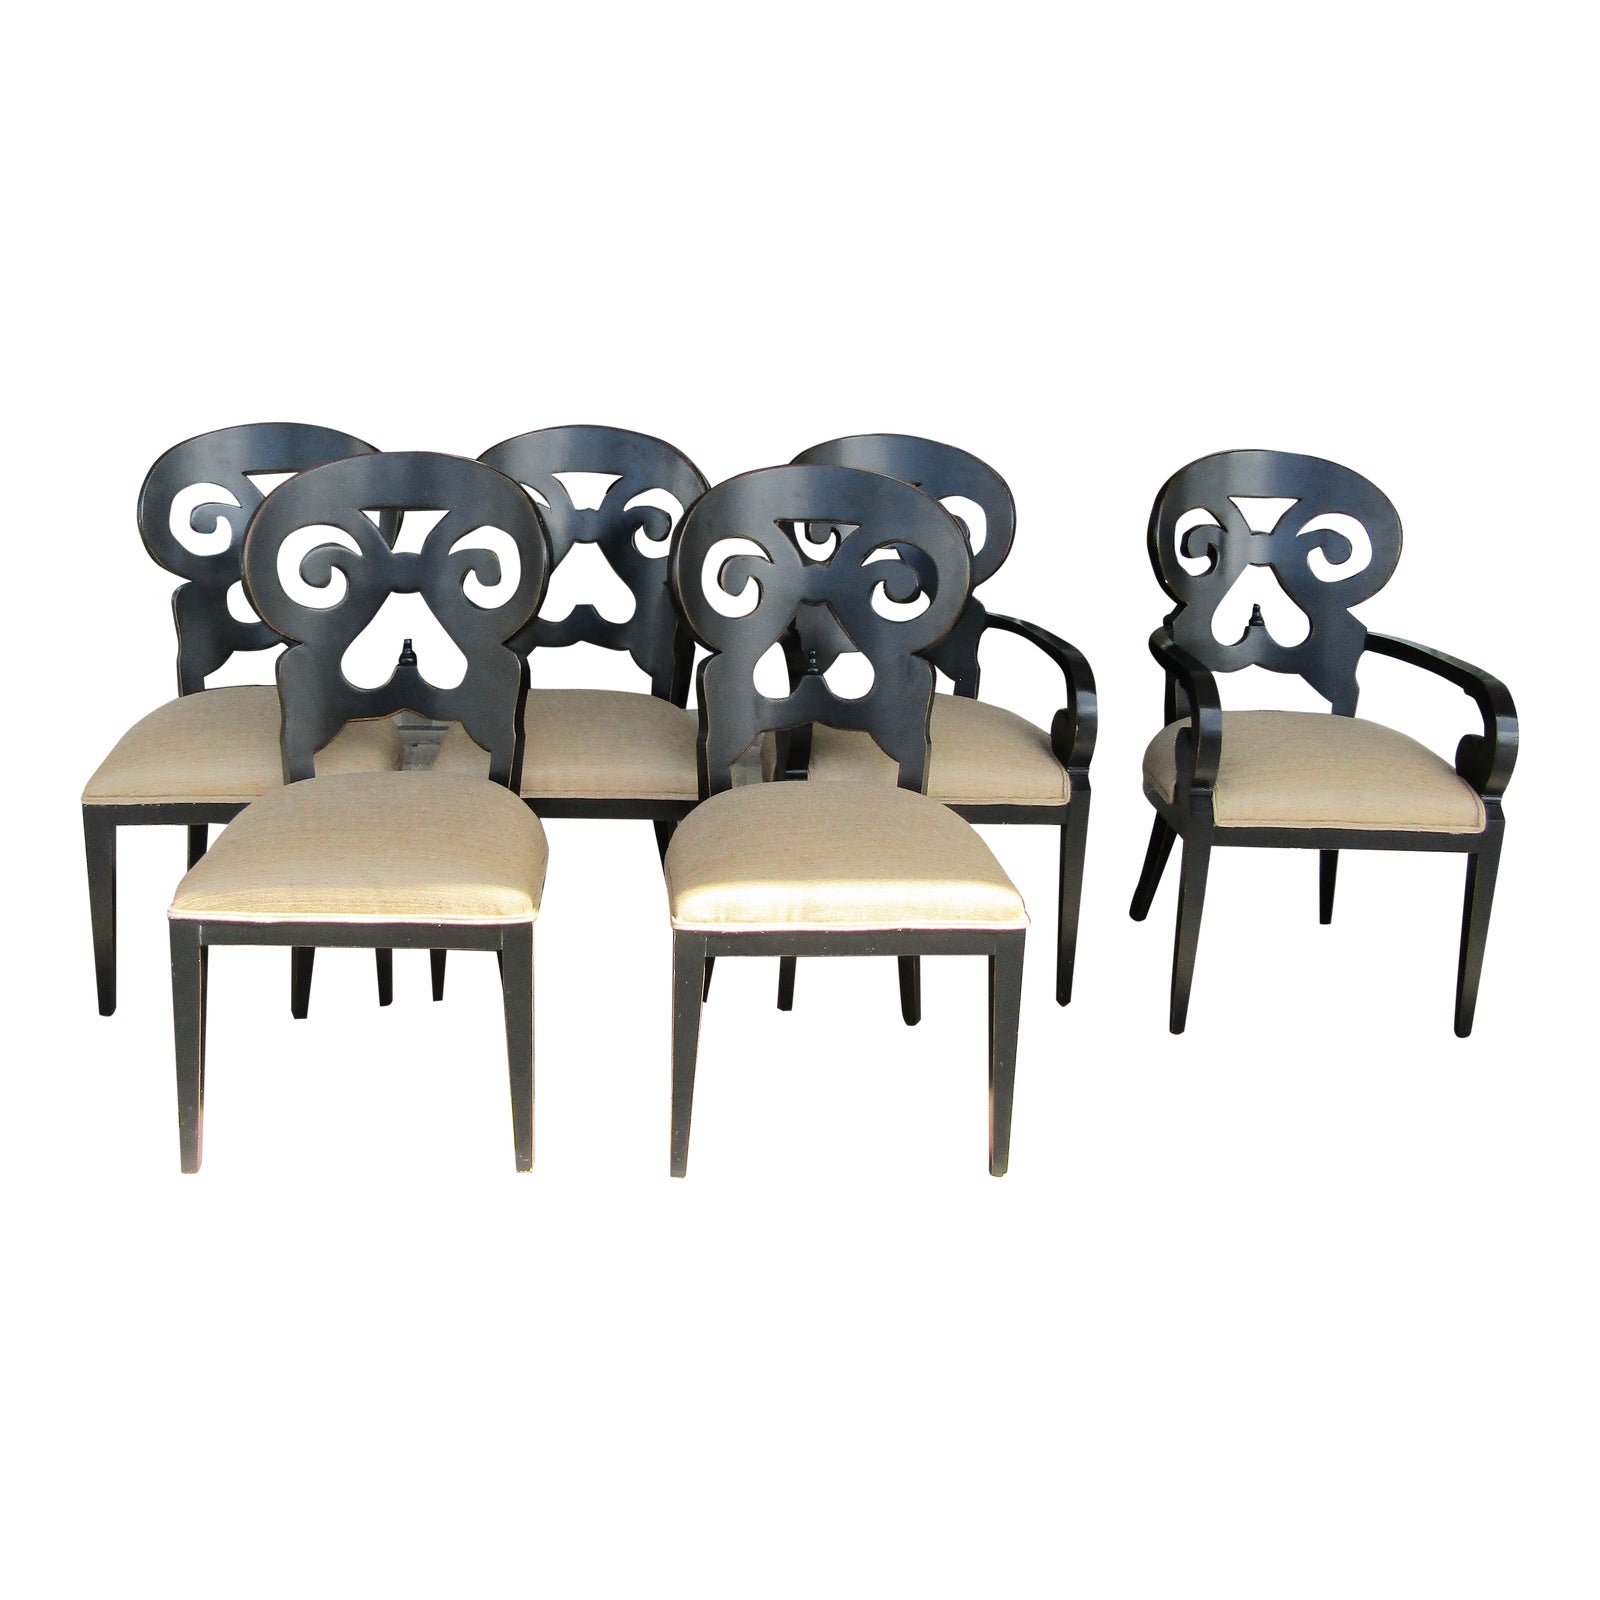 Sturdy Wood Chairs for Sale in Mississauga/Peel Region: Set of 6 for $115